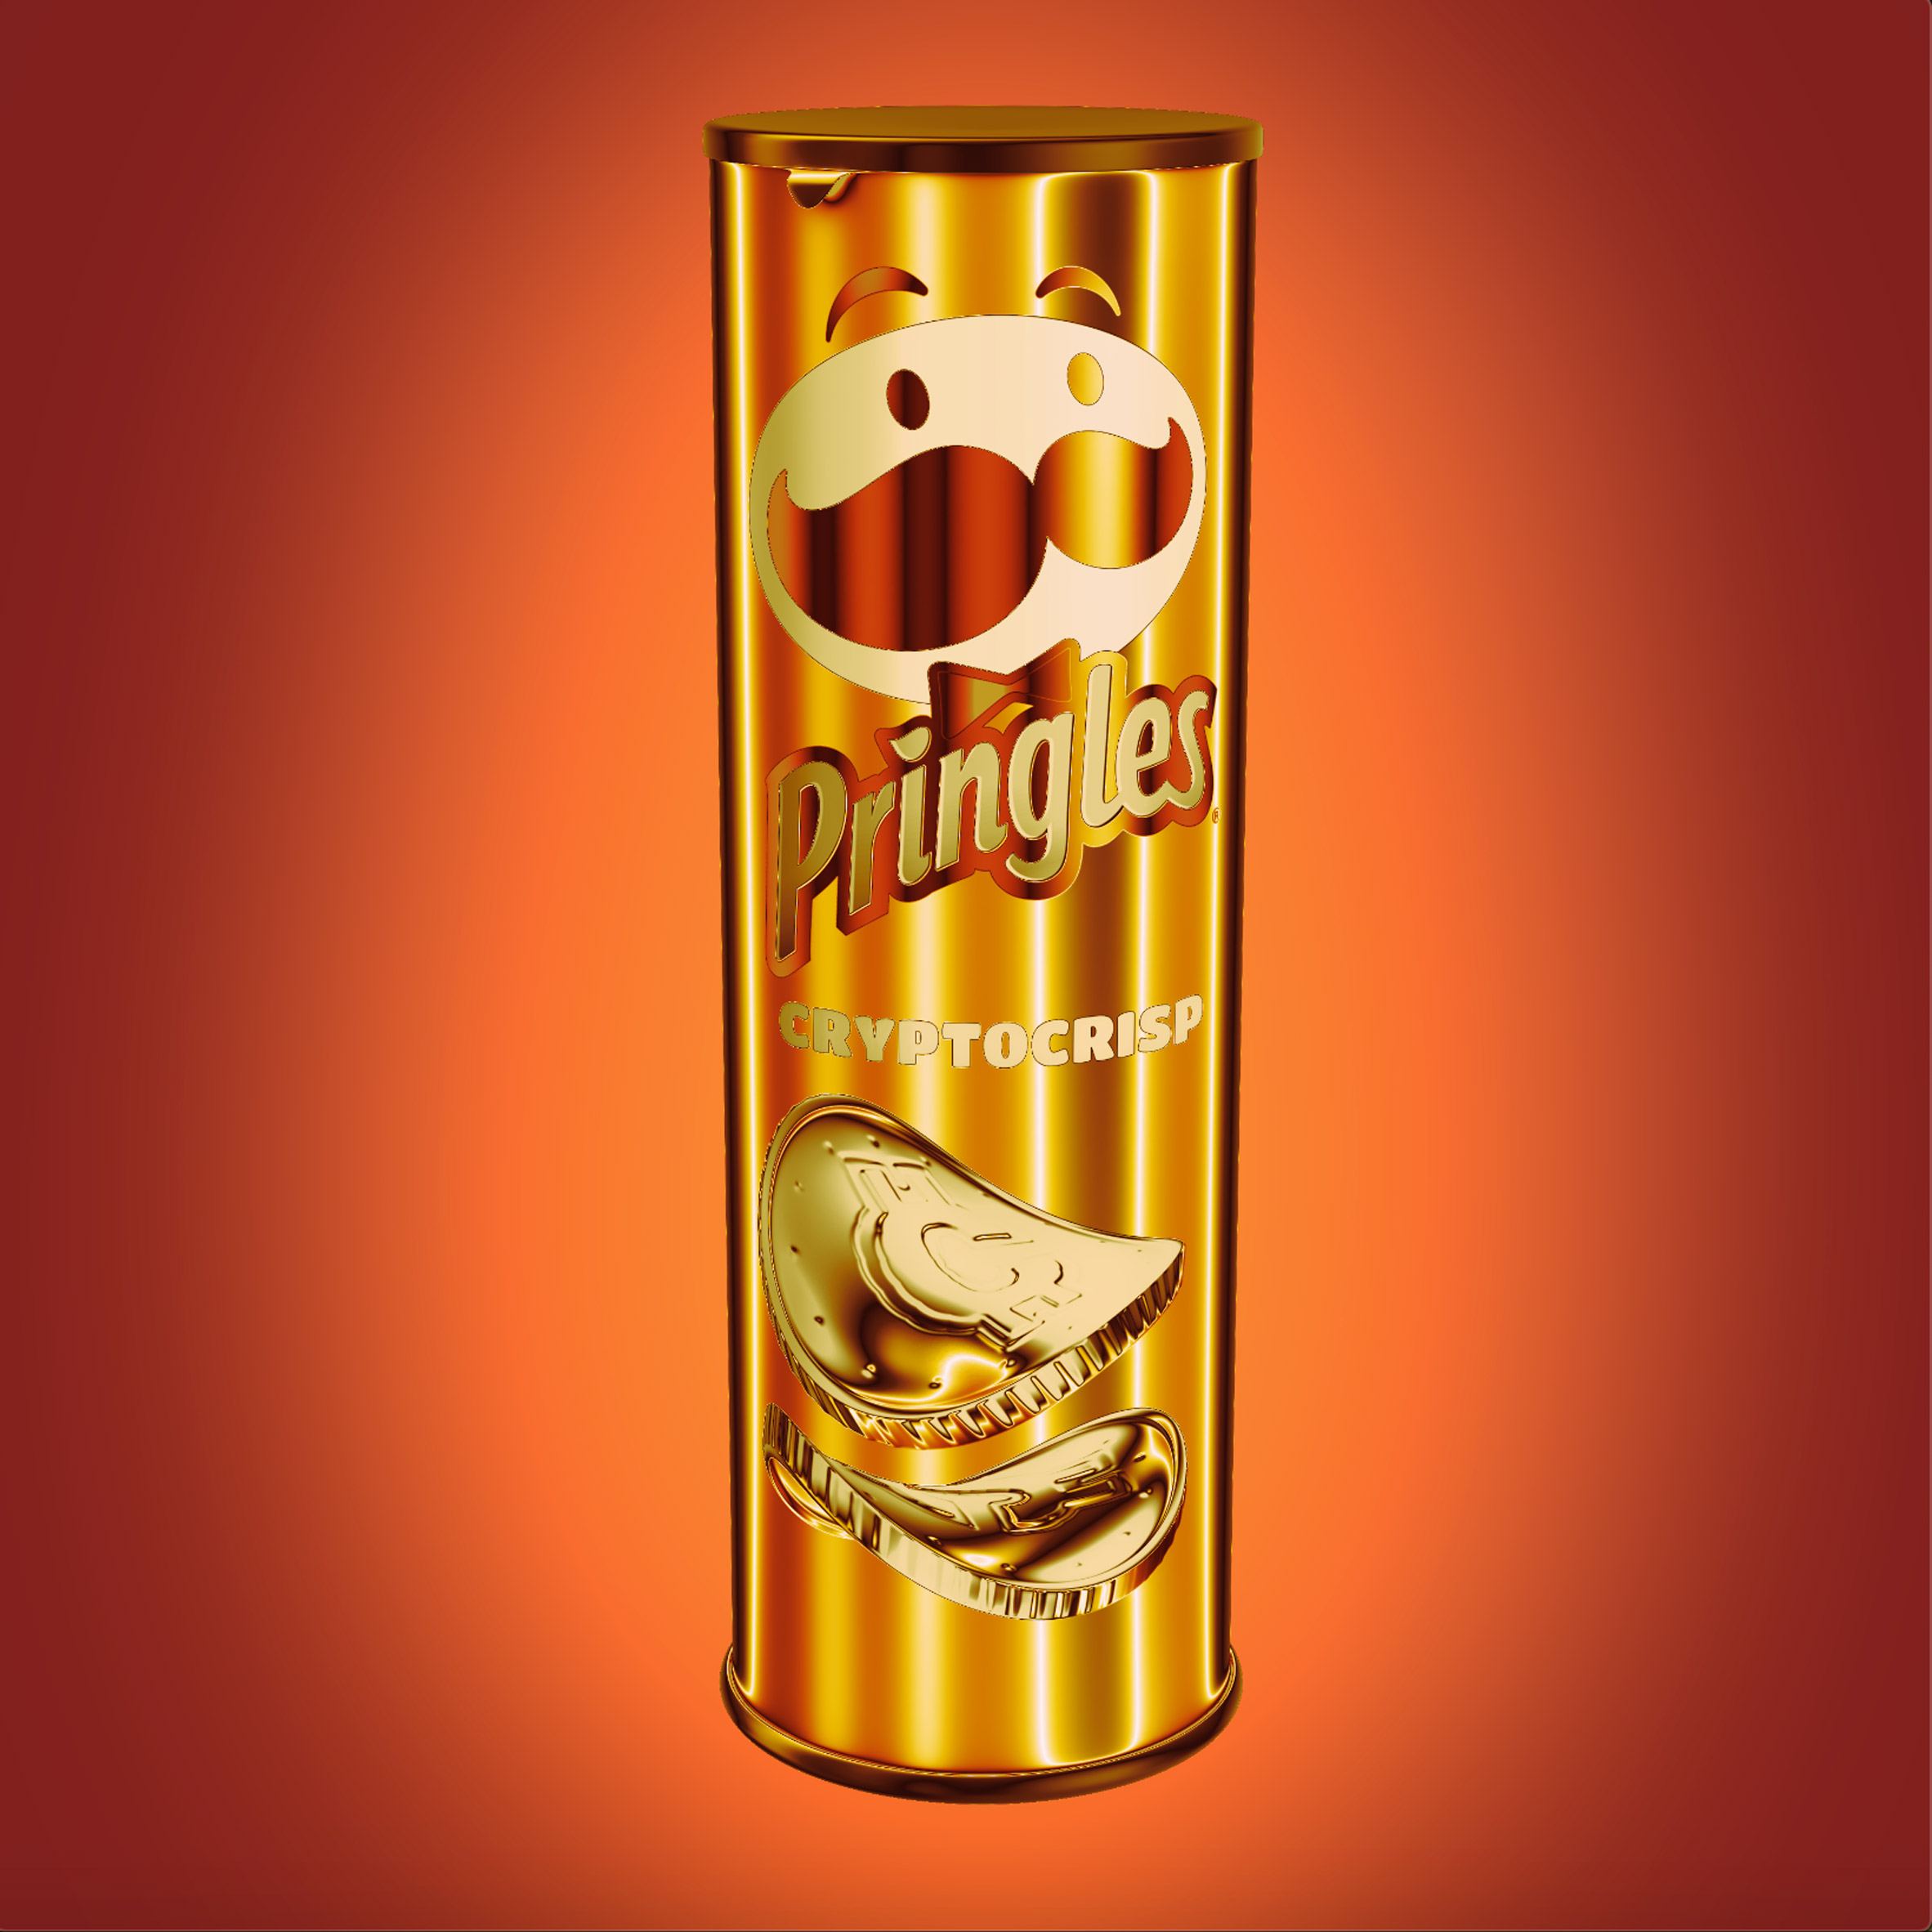 CryptoCrisp graphic by Pringles and 